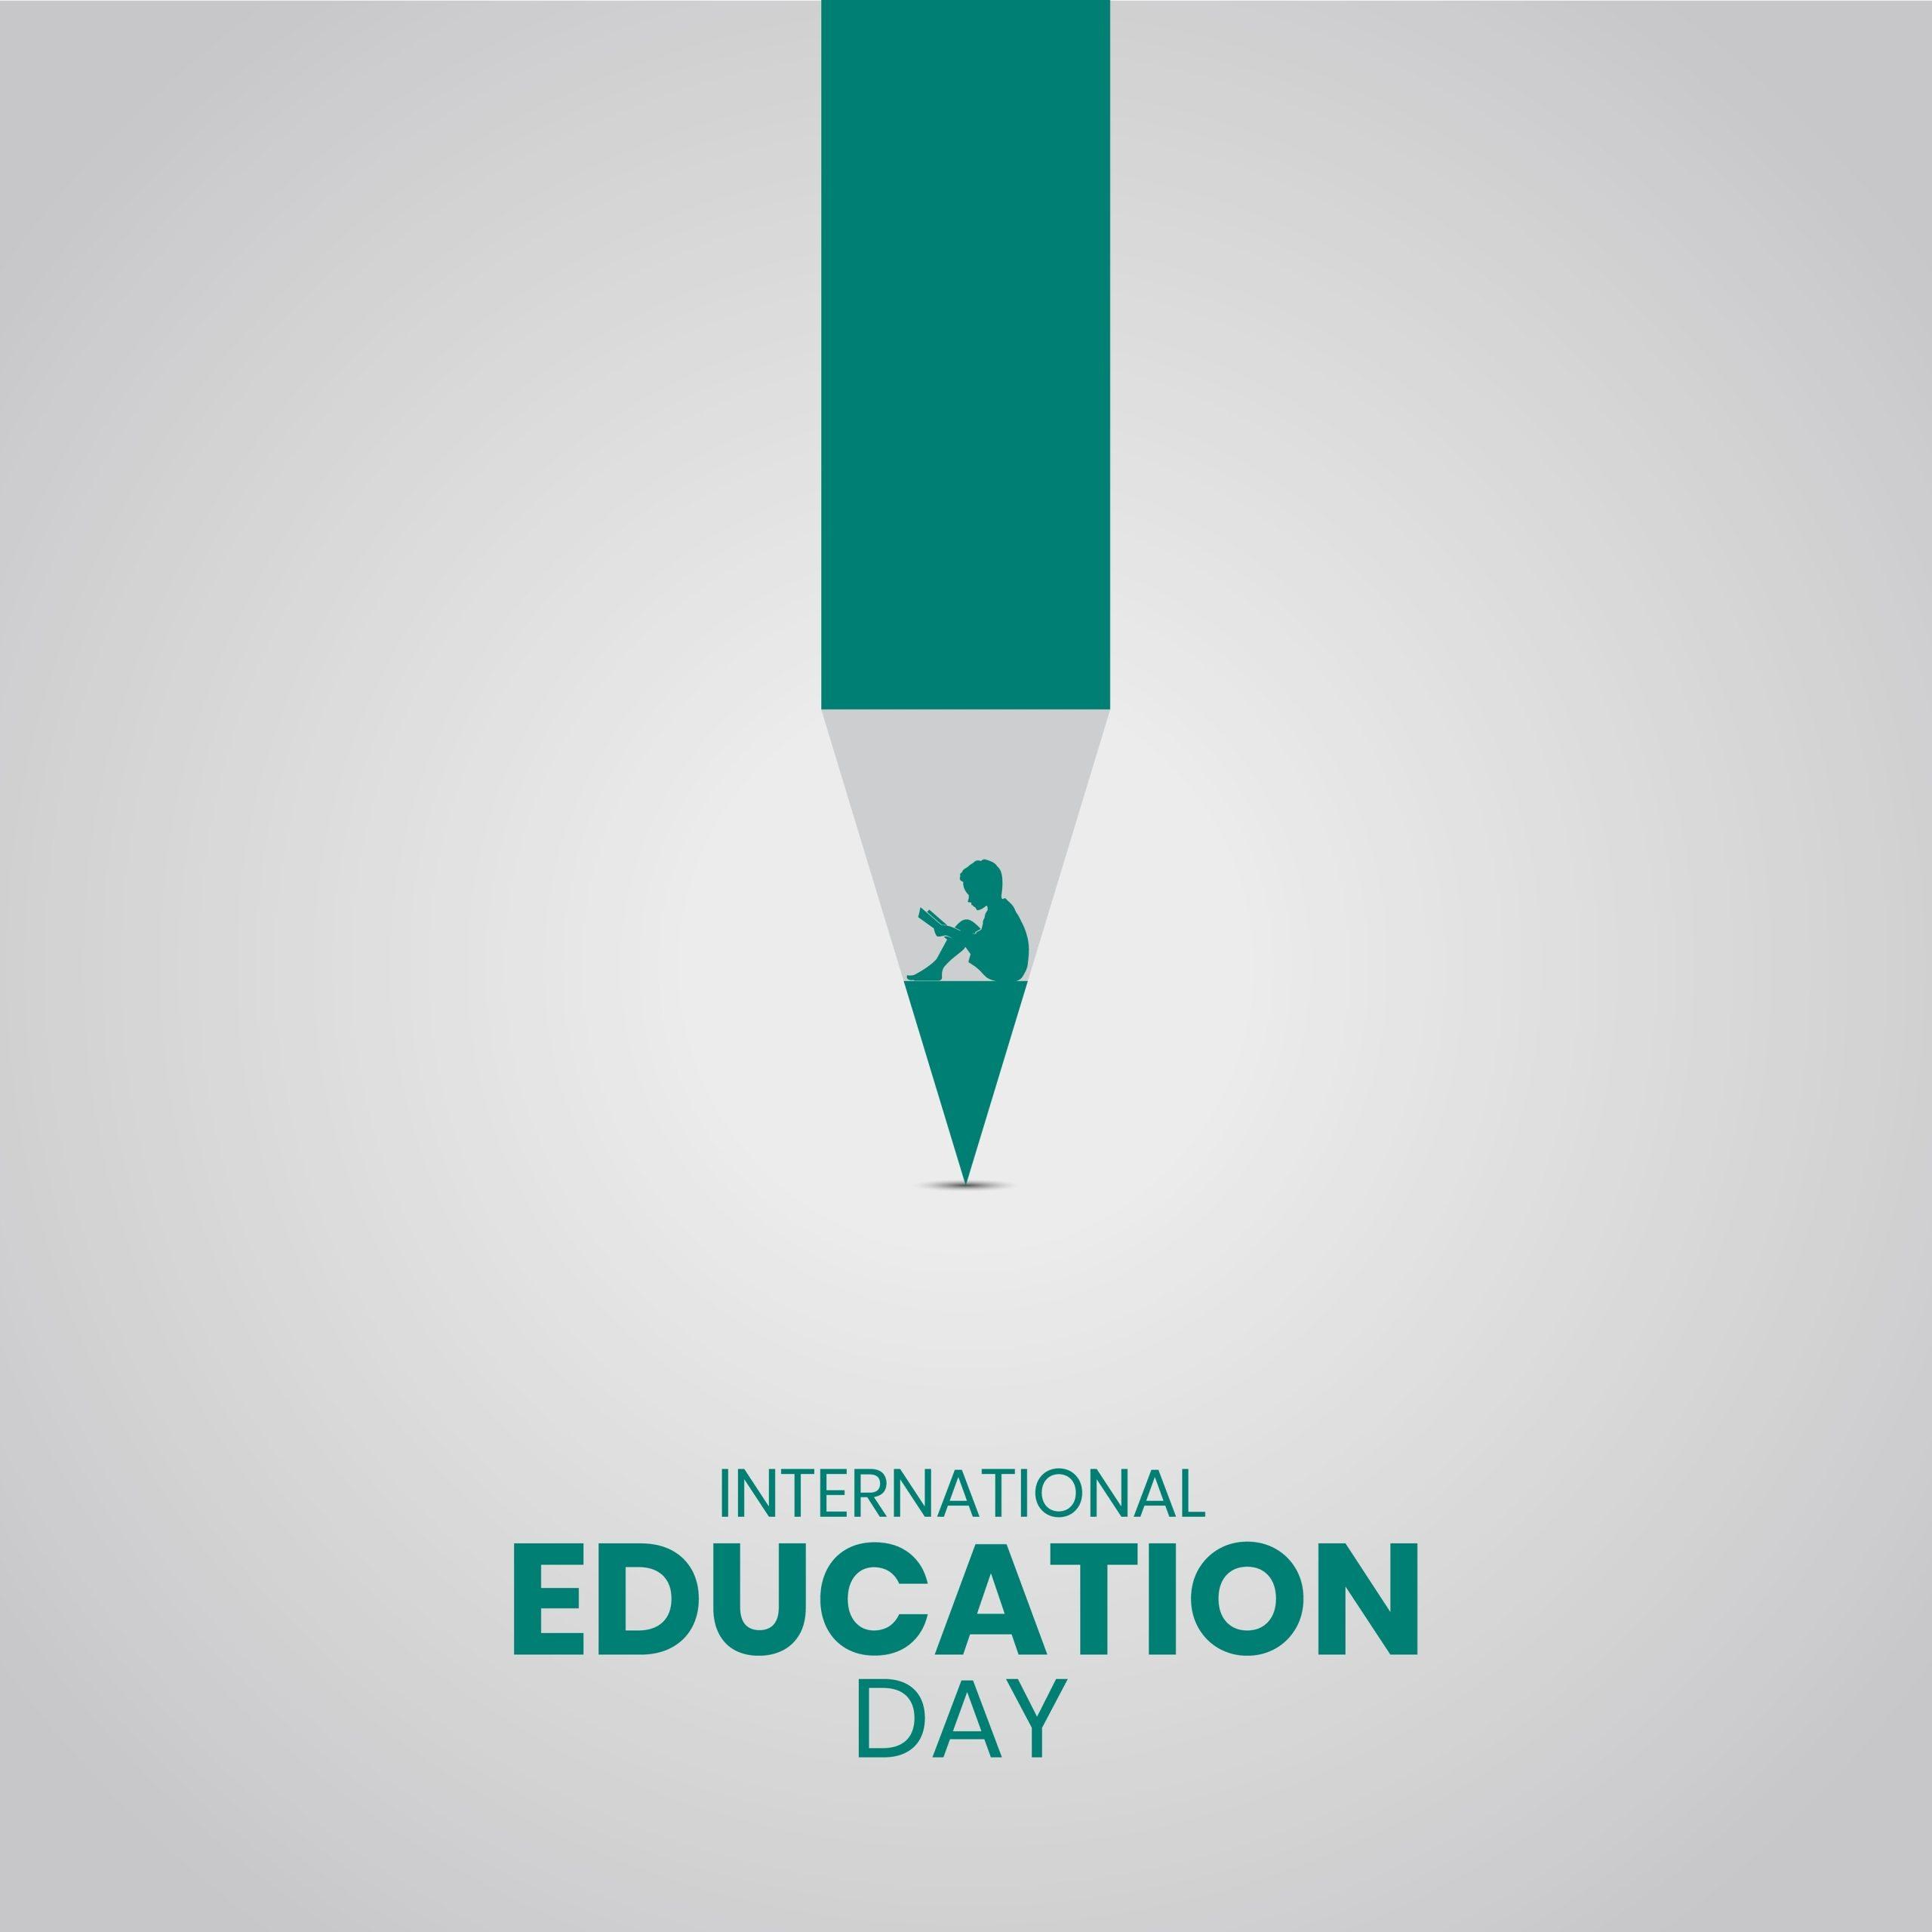 Why Is International Education Day Celebrated?